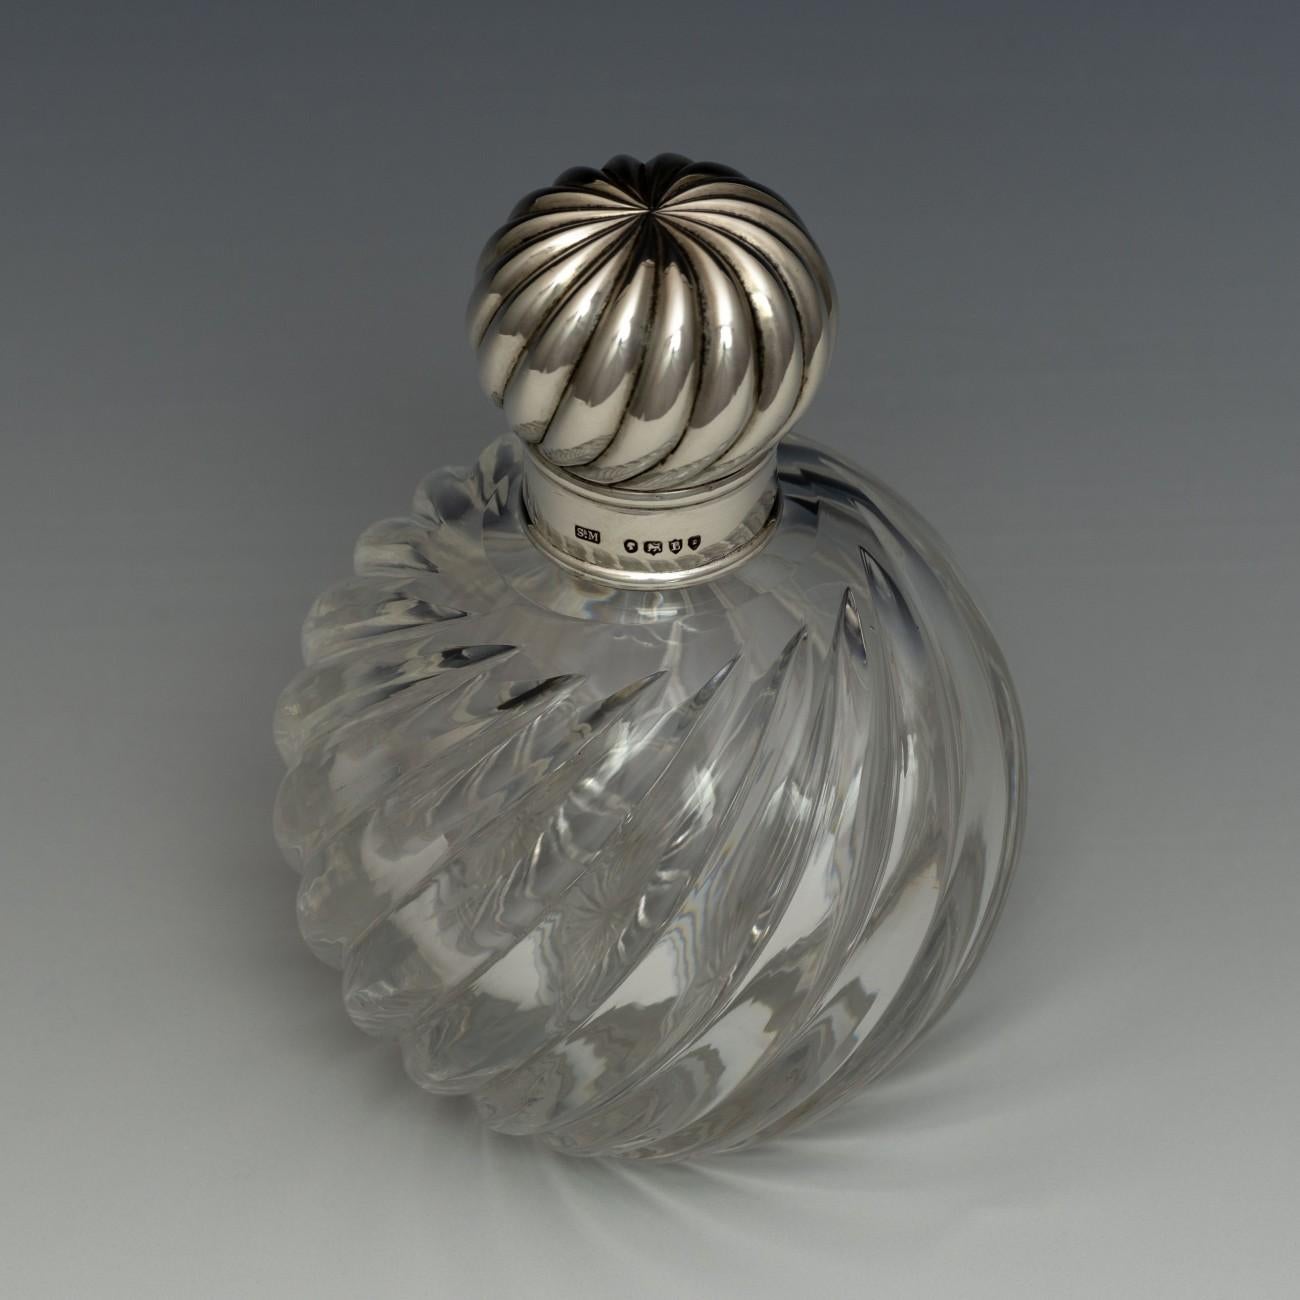 A fabulous scent bottle with star cut base, glass stopper, silver collar and silver top that matches the decorative finish of the wrythen glass, hallmarked London 1886. Also has makers mark for Sampson Mordan & Co. Wrythen glass is created by